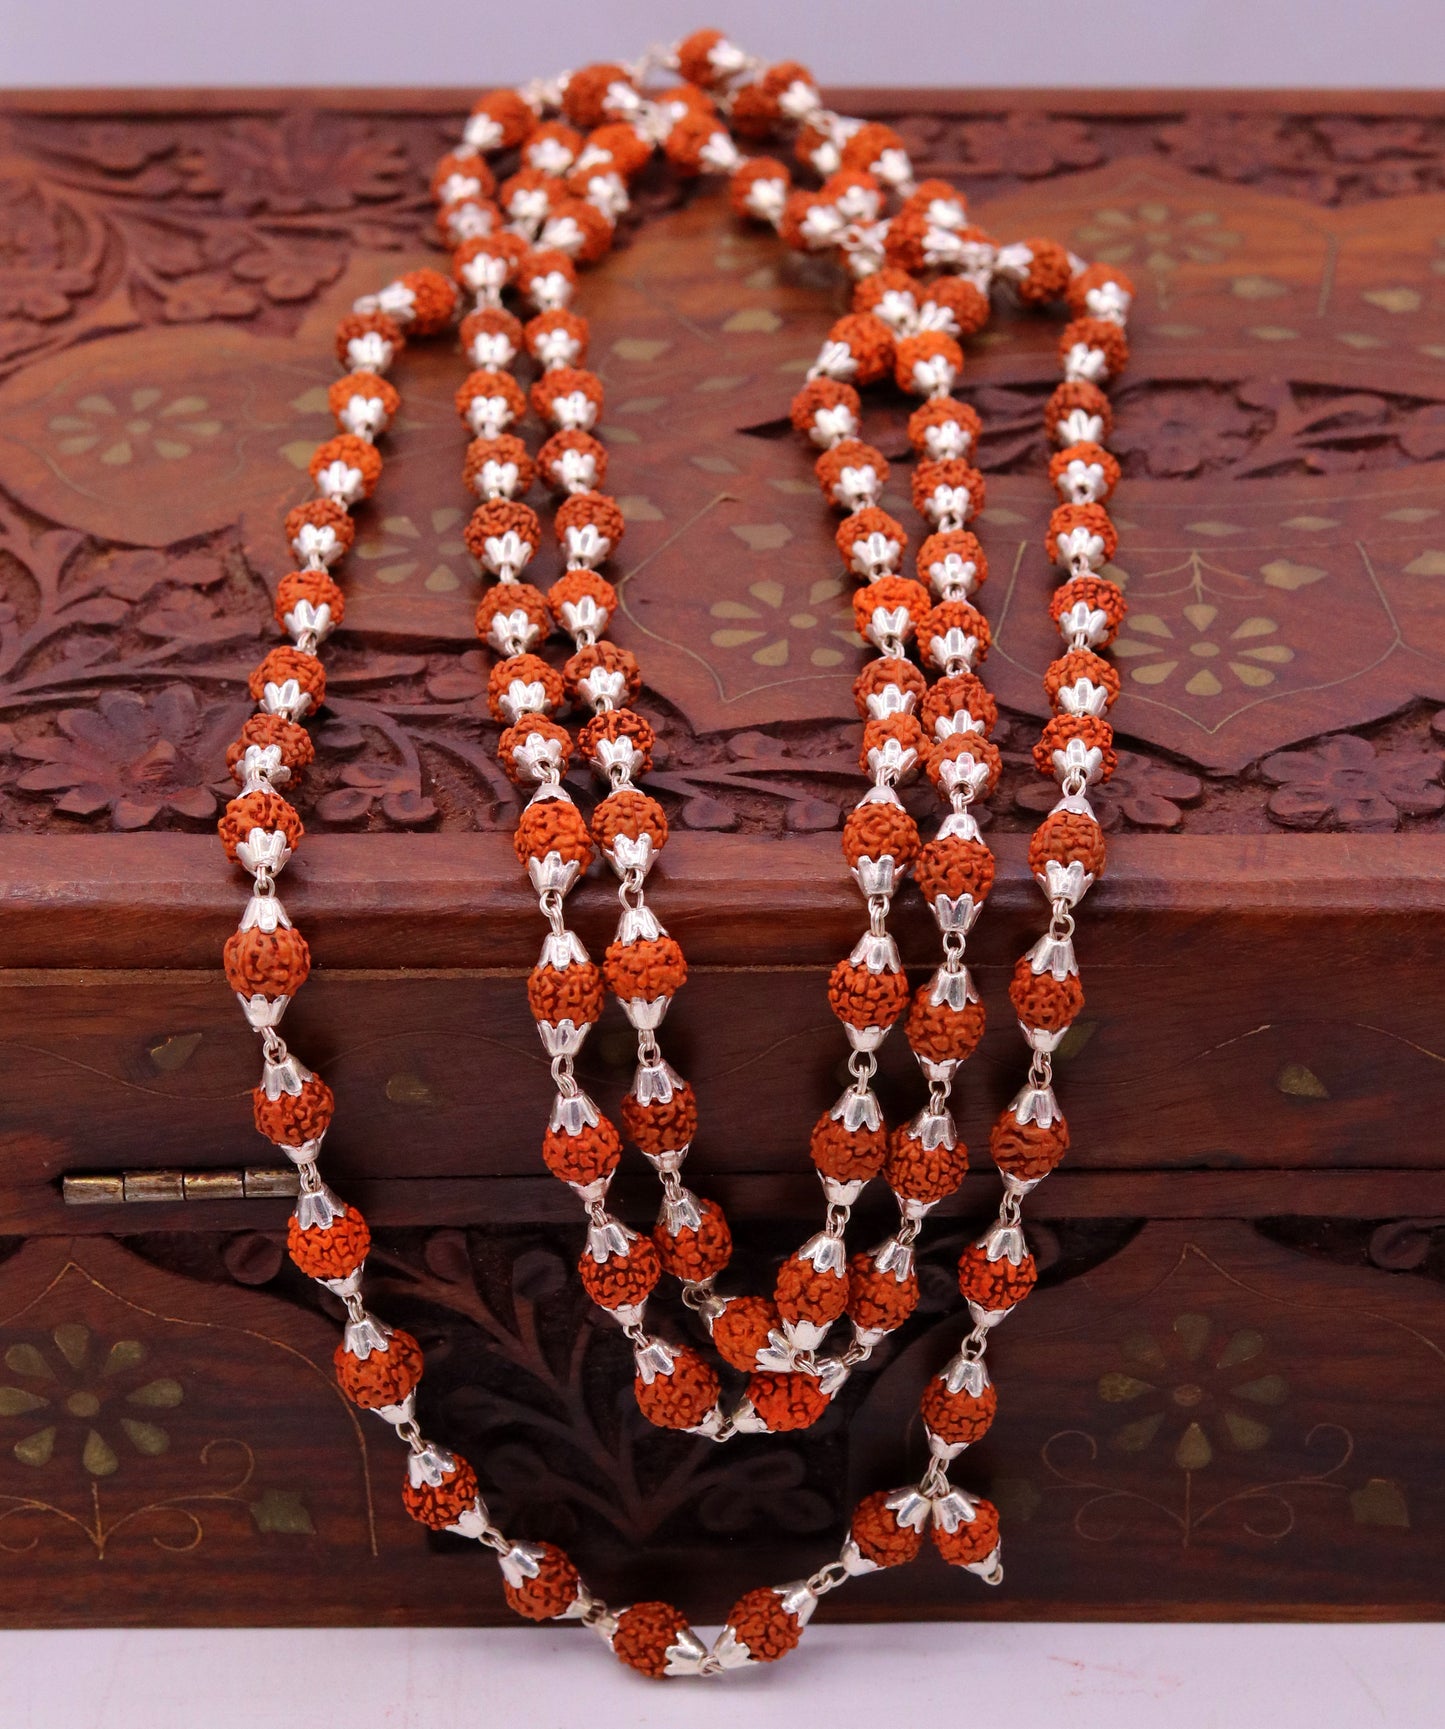 7 mm natural Rudraksha beads seeds Vintage design Sterling silver 108 beads chain necklace for japping mantra to pray the god jewelry ch61 - TRIBAL ORNAMENTS